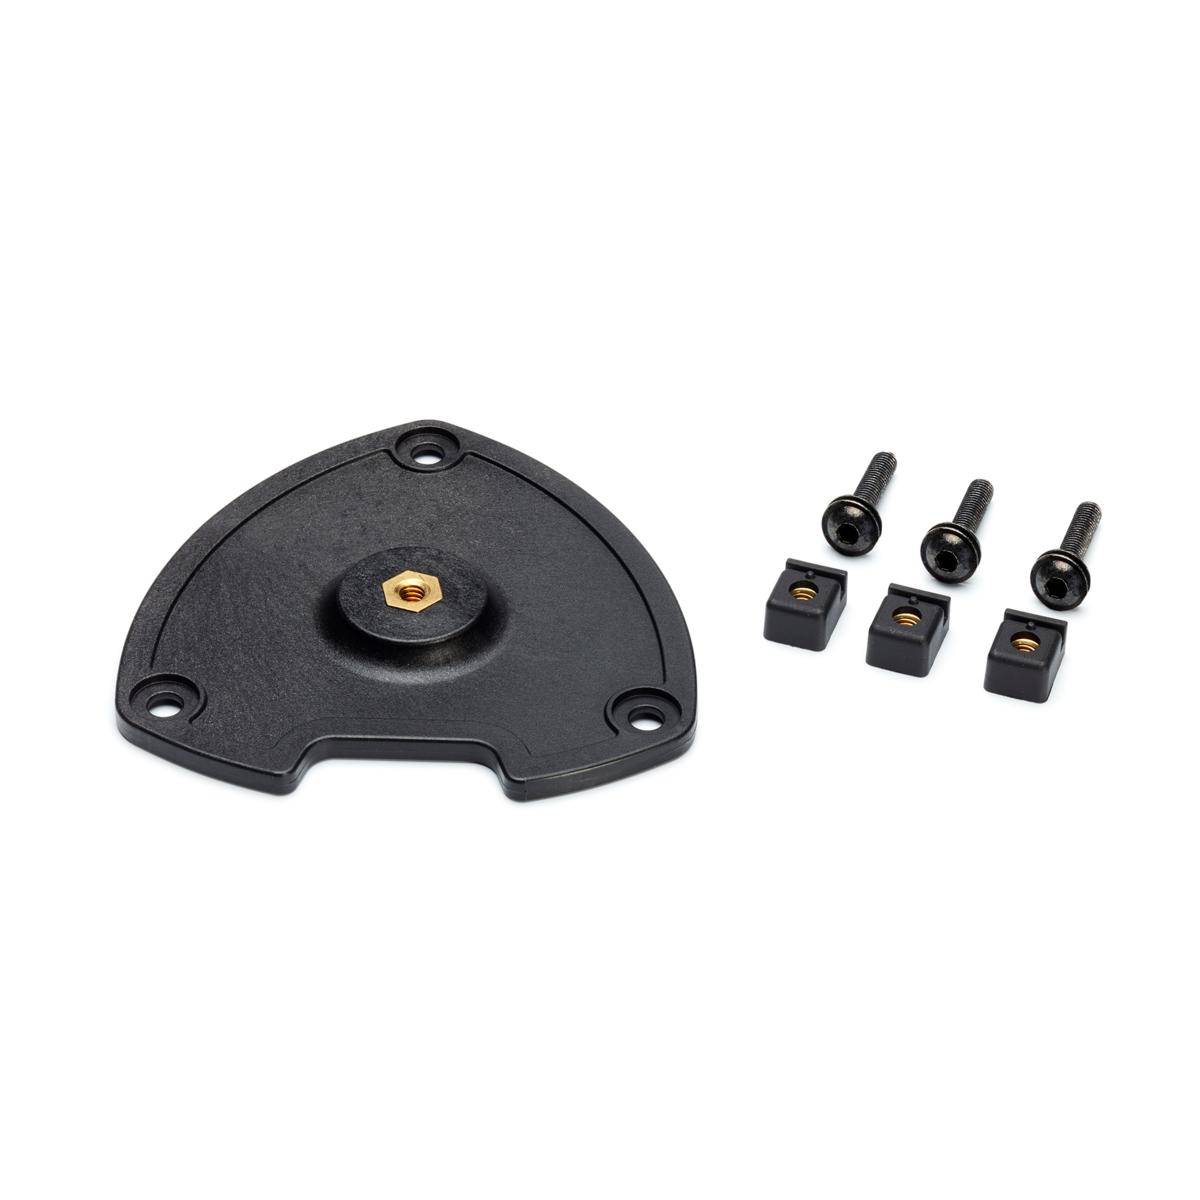 Enhance your experience on the Yamaha FX Series WaveRunners! This mounting base kit allows you to mount both your speakers on the dashboard. You can either complement your existing mounting plate, by replacing the bottle holder, or upgrade your machine with a set.